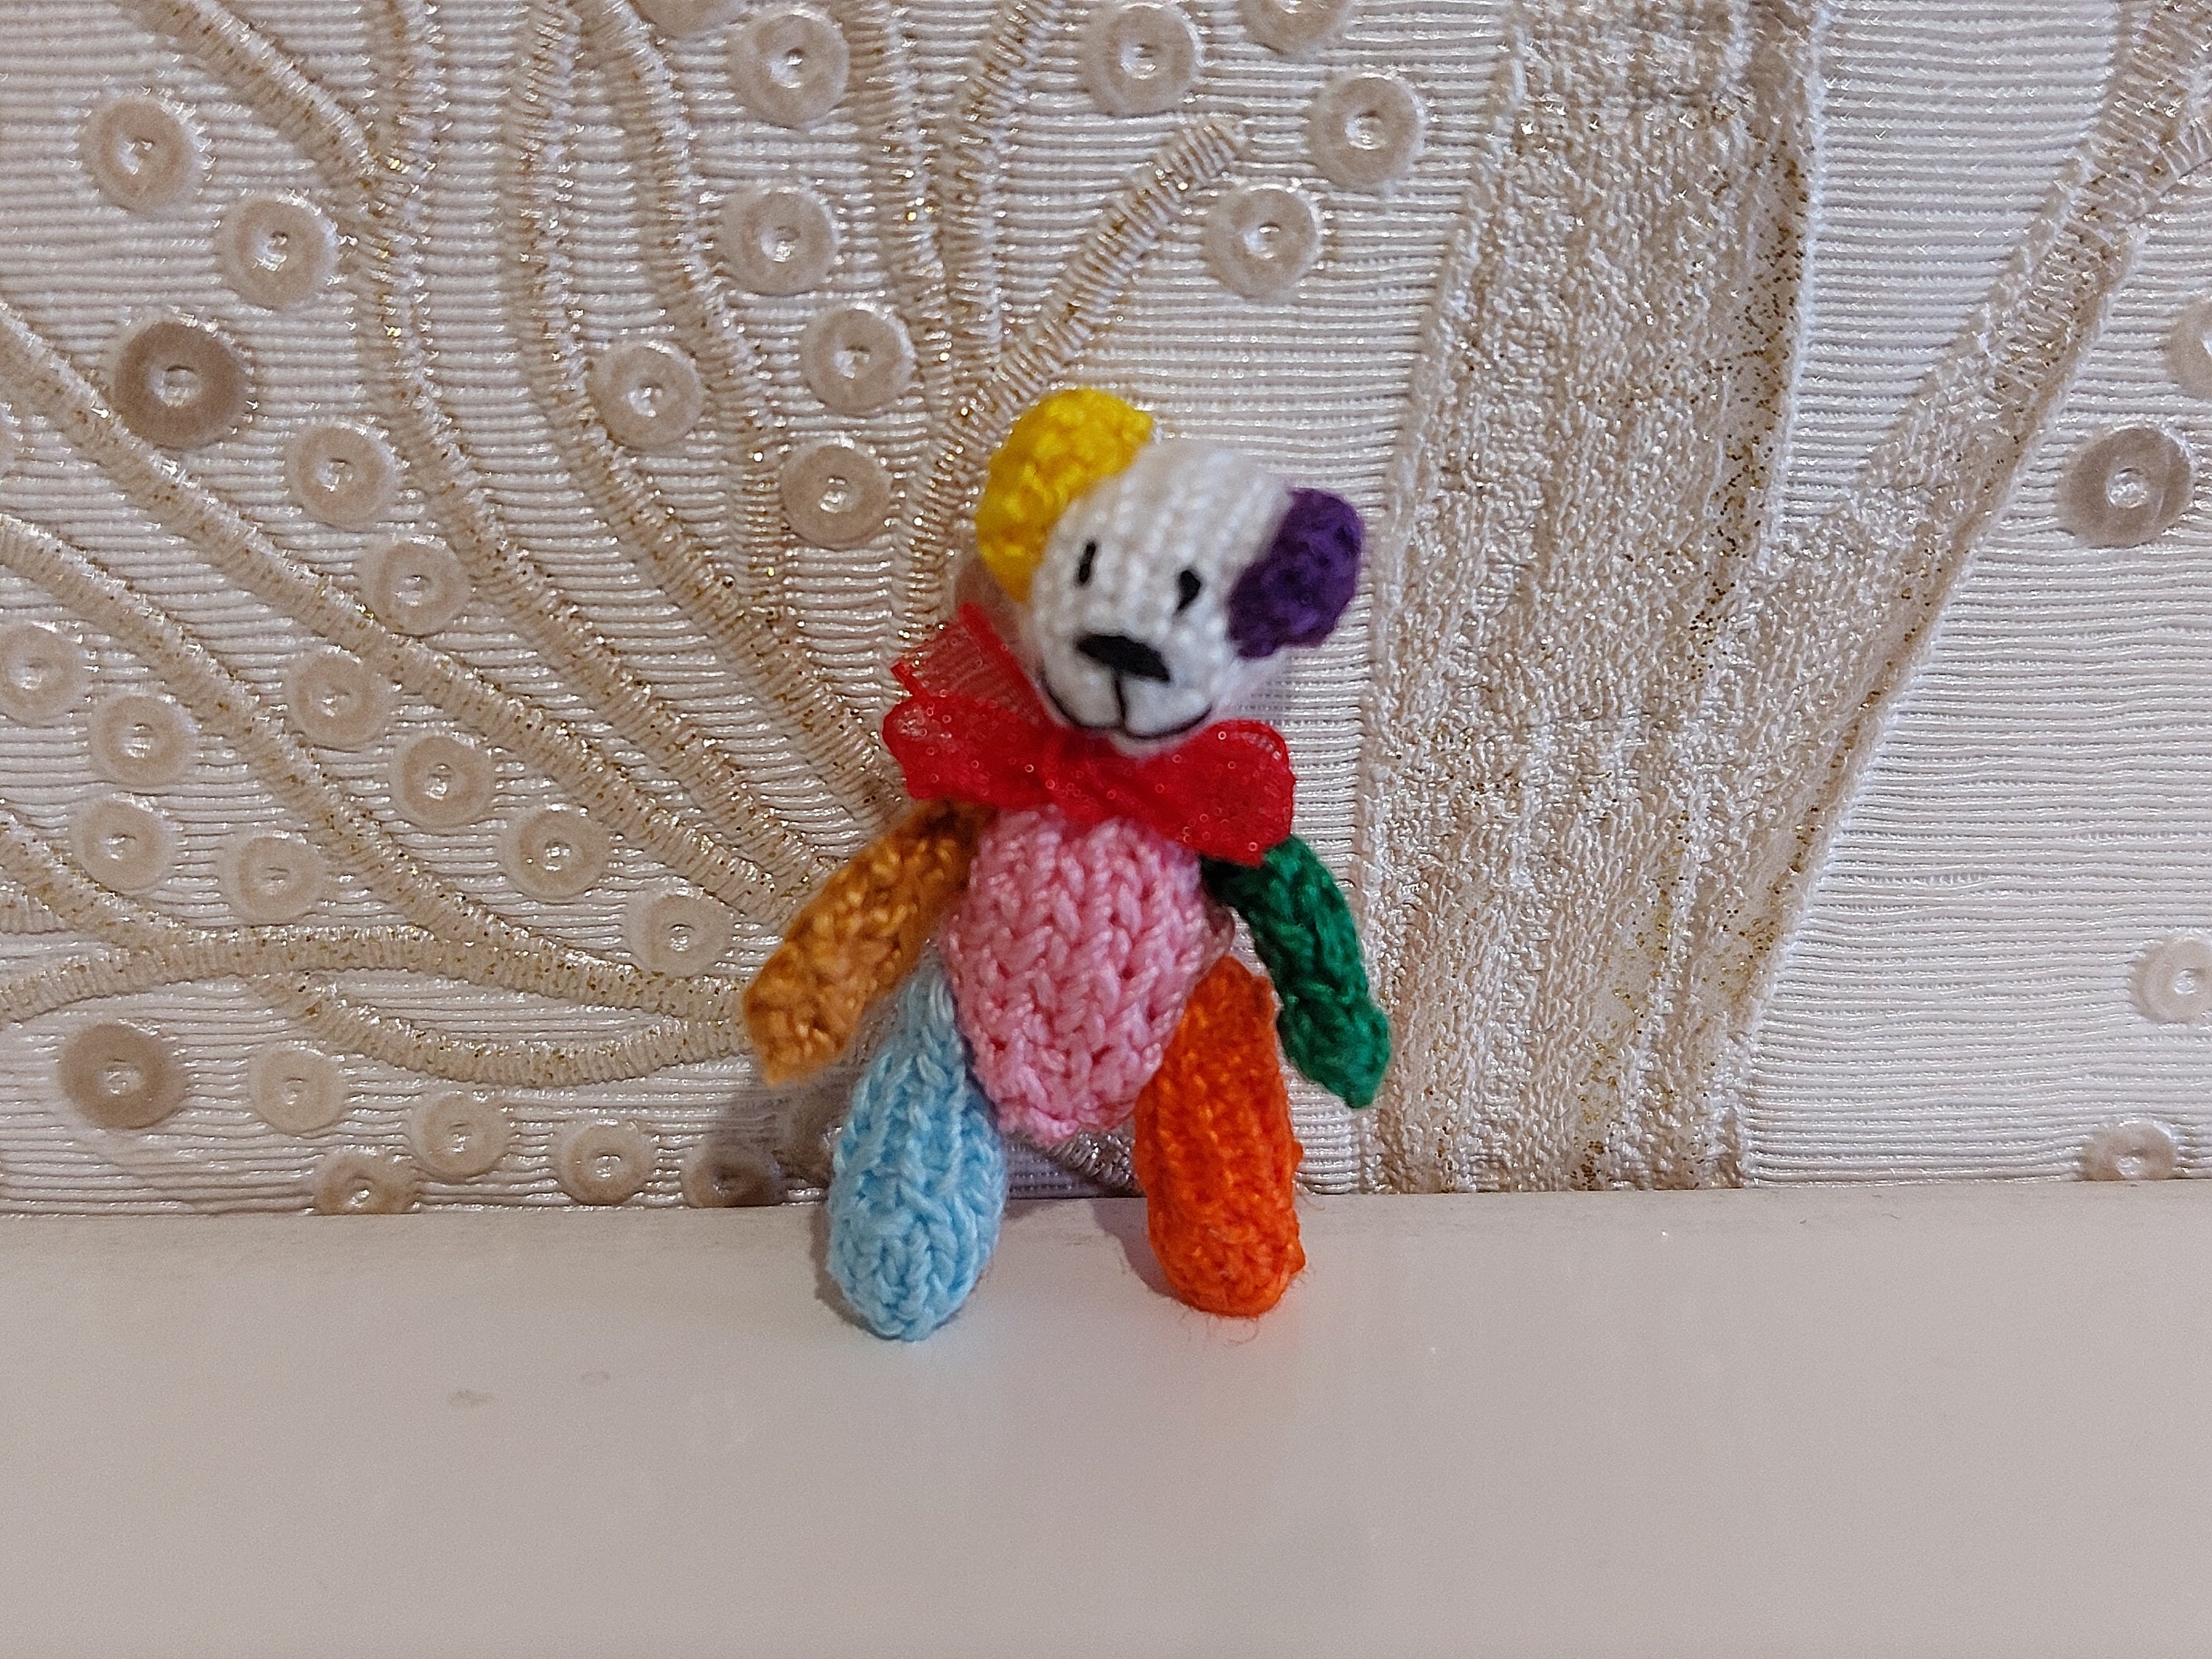 3 cm Varigated Thread Hand Knitted Tiny Jointed Teddy Bear Birthday Gift 